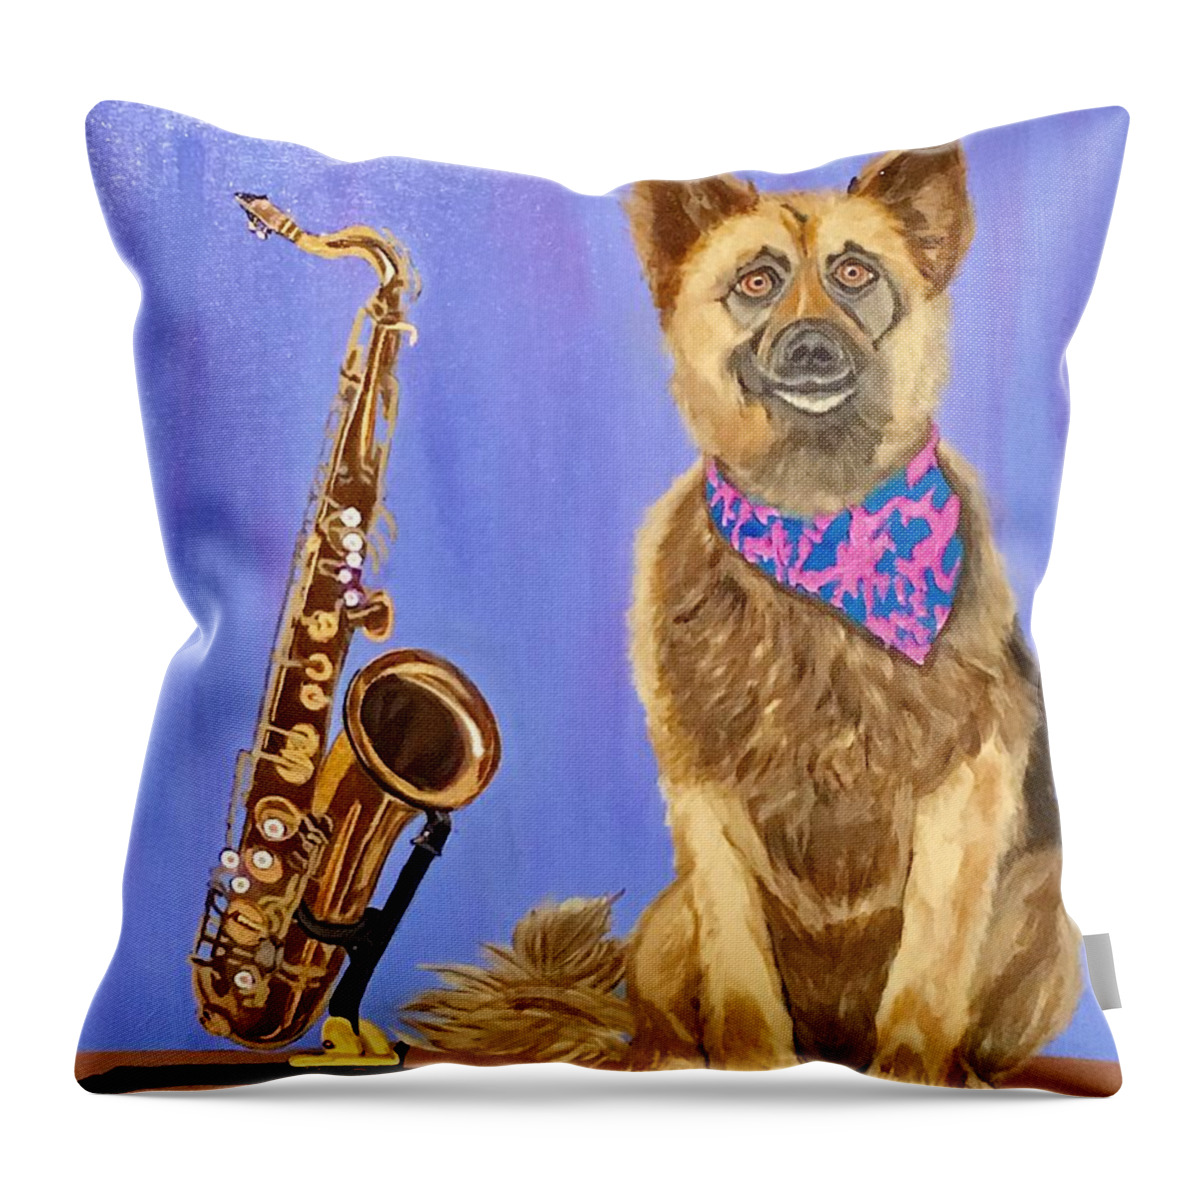  Throw Pillow featuring the painting Mimi and me by Bill Manson